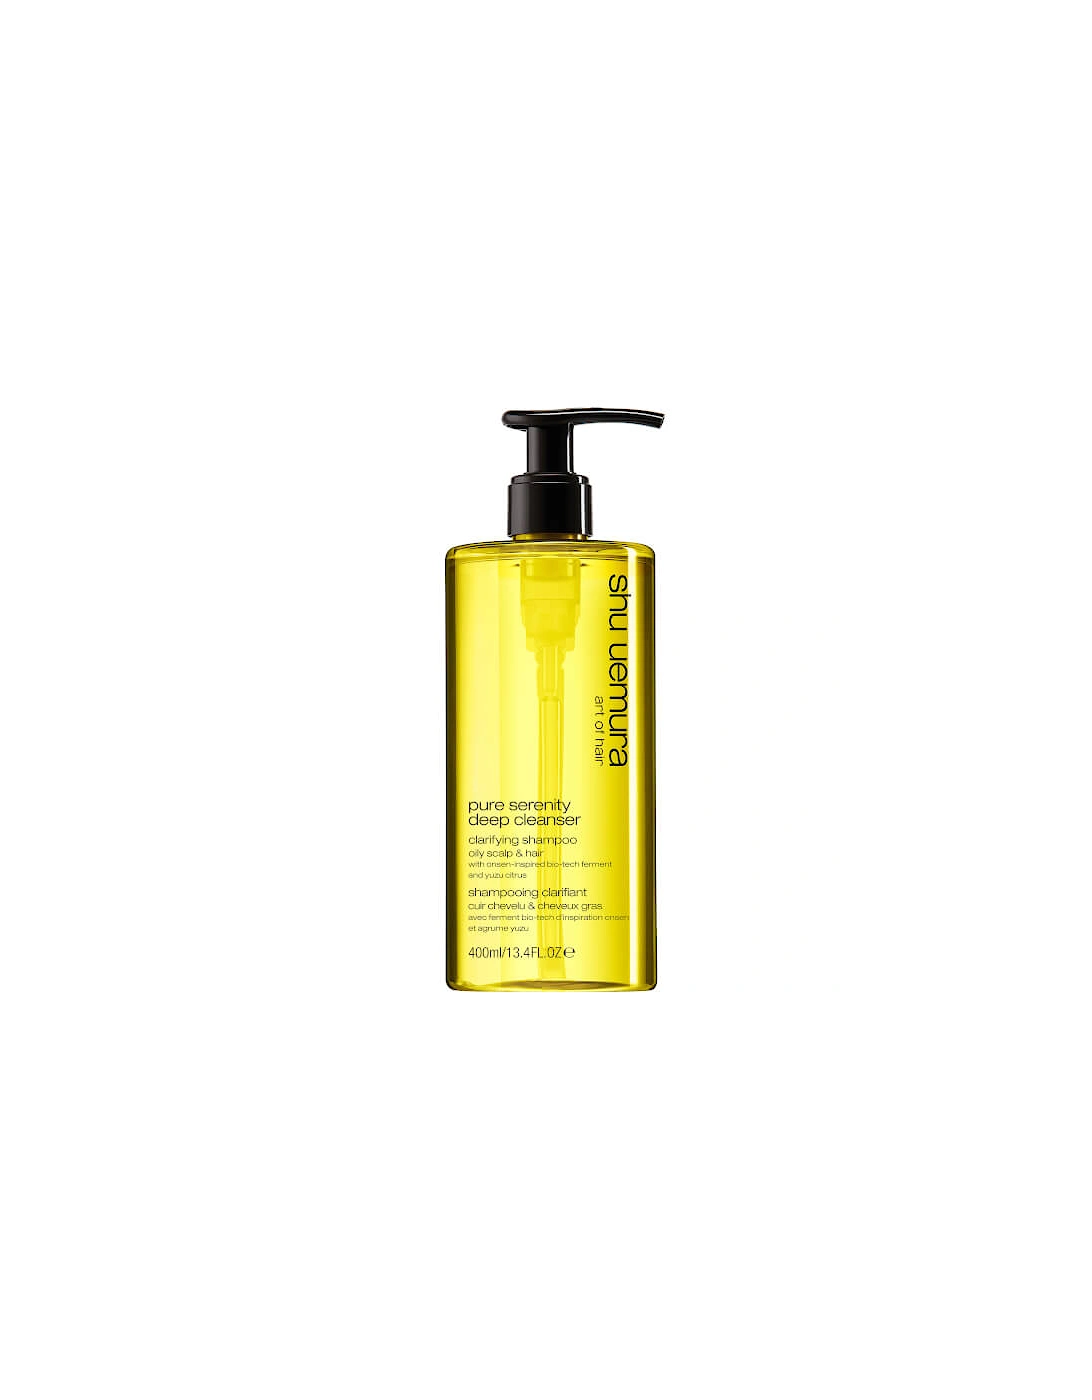 Art of Hair Pure Serenity Cleansing Oil 400ml, 2 of 1